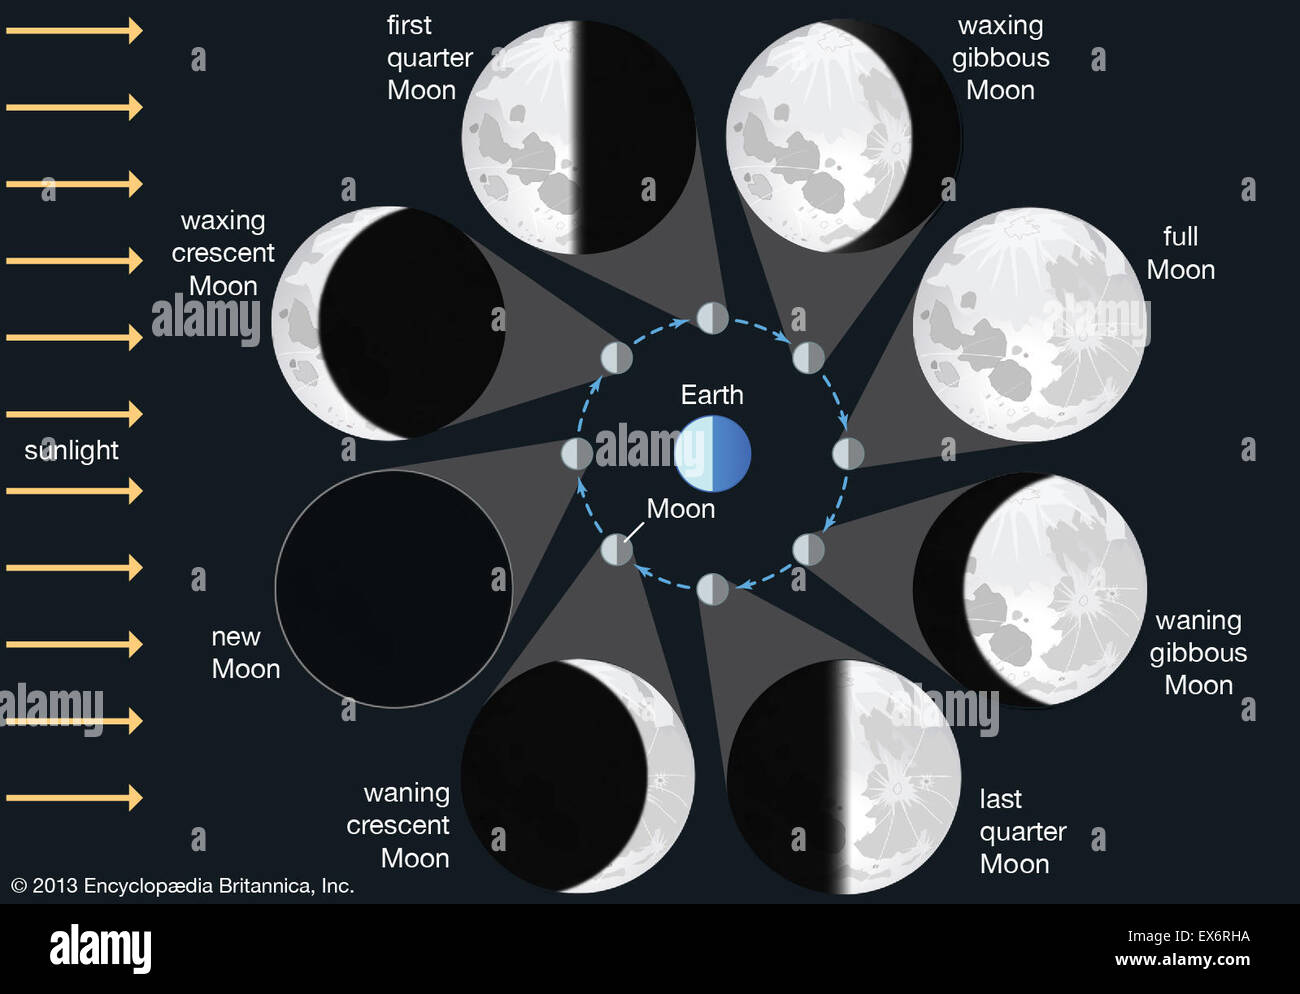 Phases Of The Moon Explained - Bank2home.com